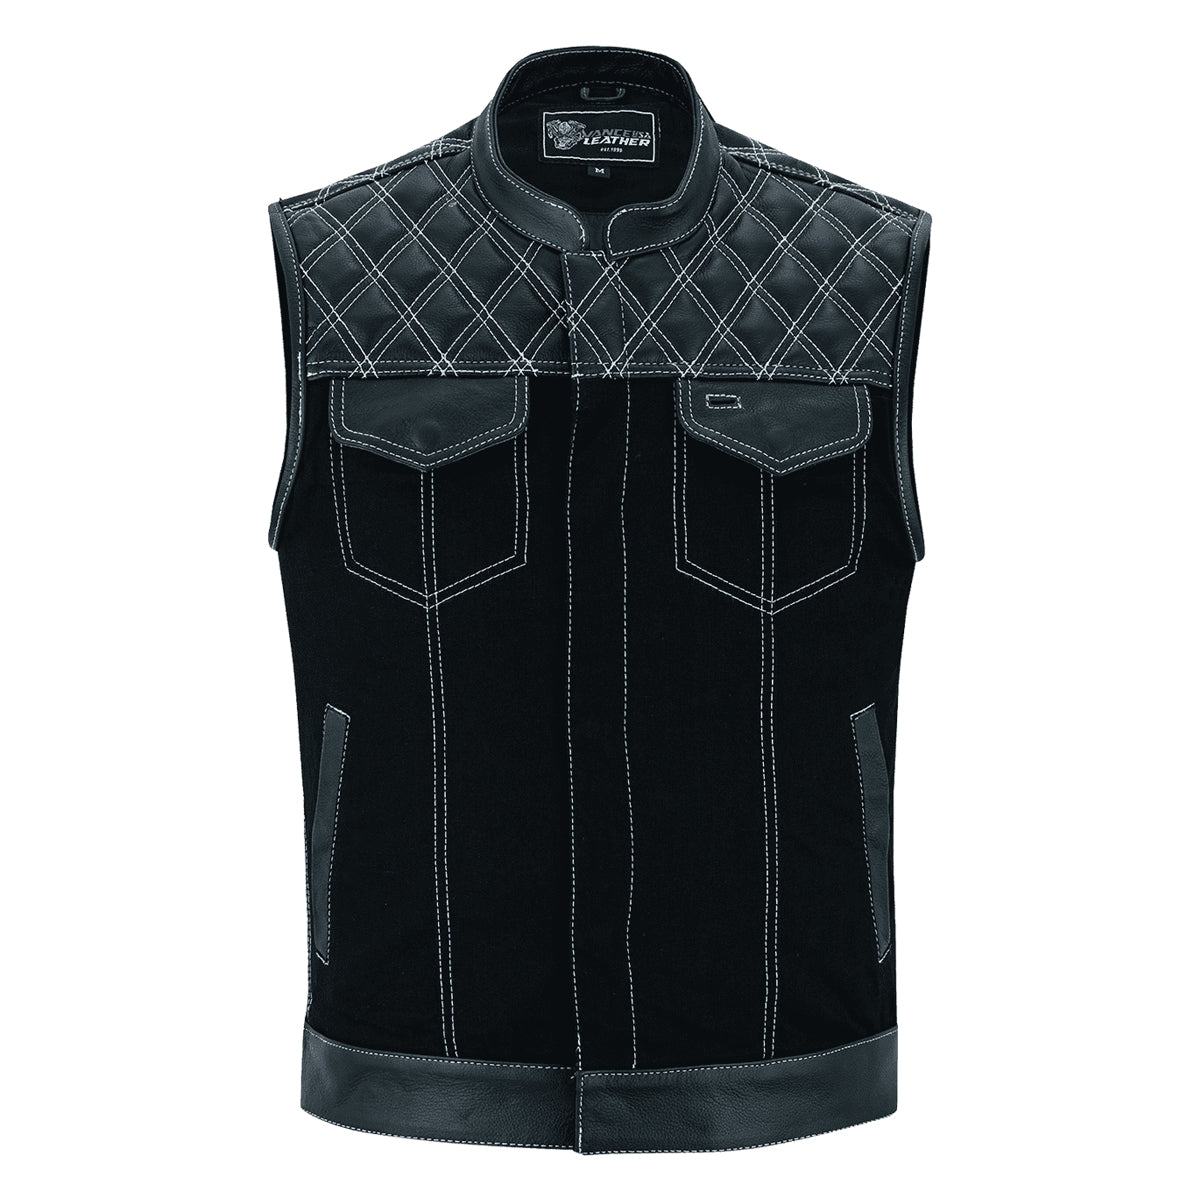 Men's Denim & Leather Motorcycle Vest with Conceal Carry Pockets 